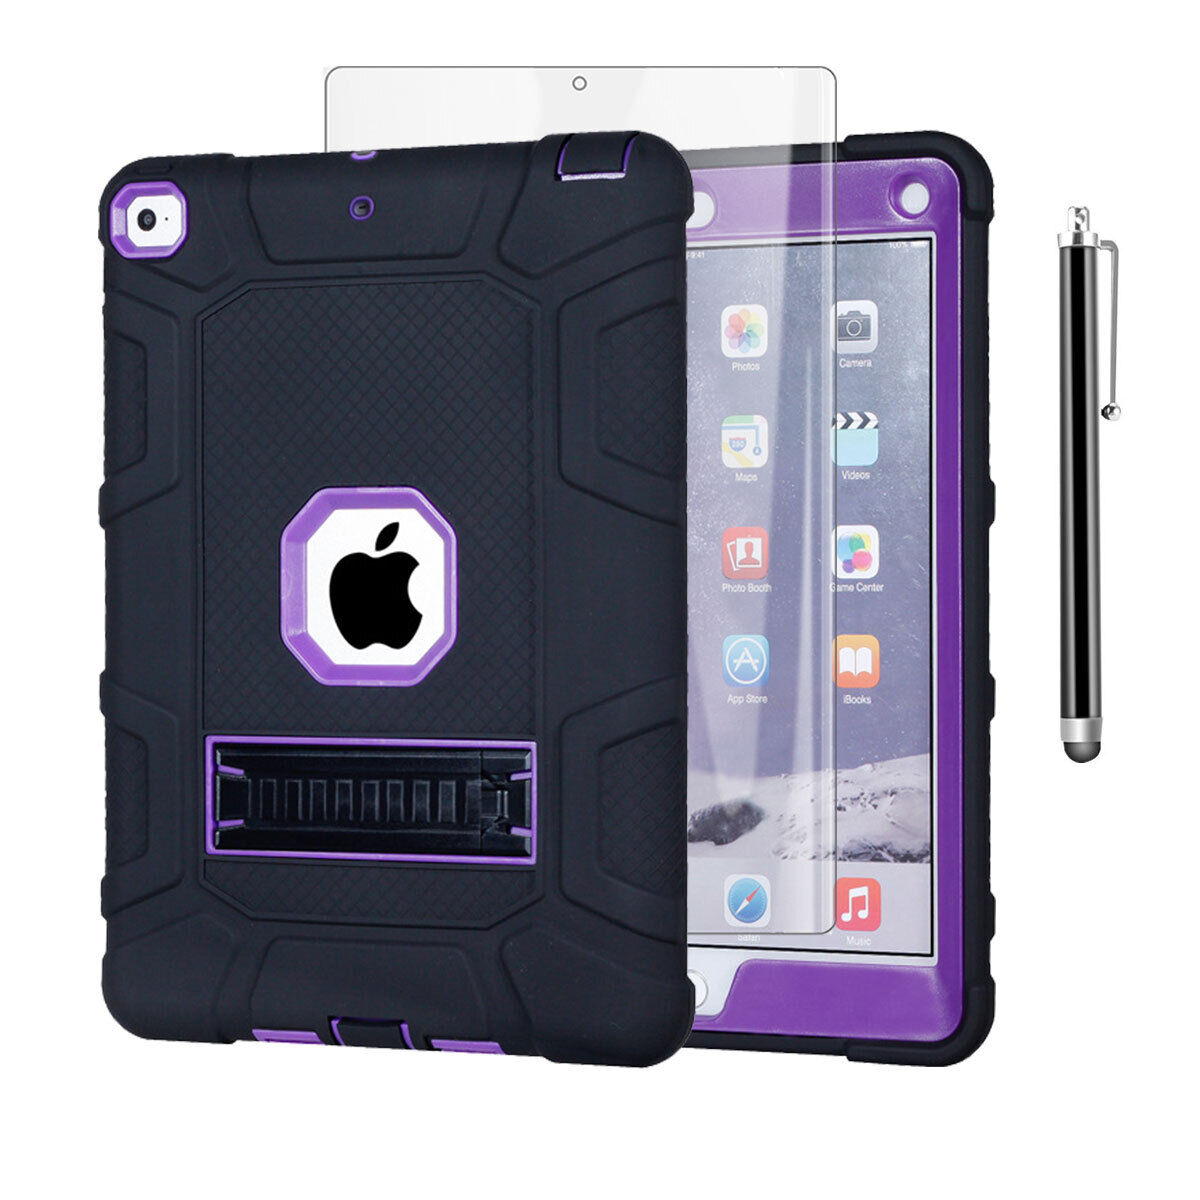 For Apple iPad mini (1/2/3/4/5) 7.9 inch Case Heavy Duty Shockproof Rugged Cover